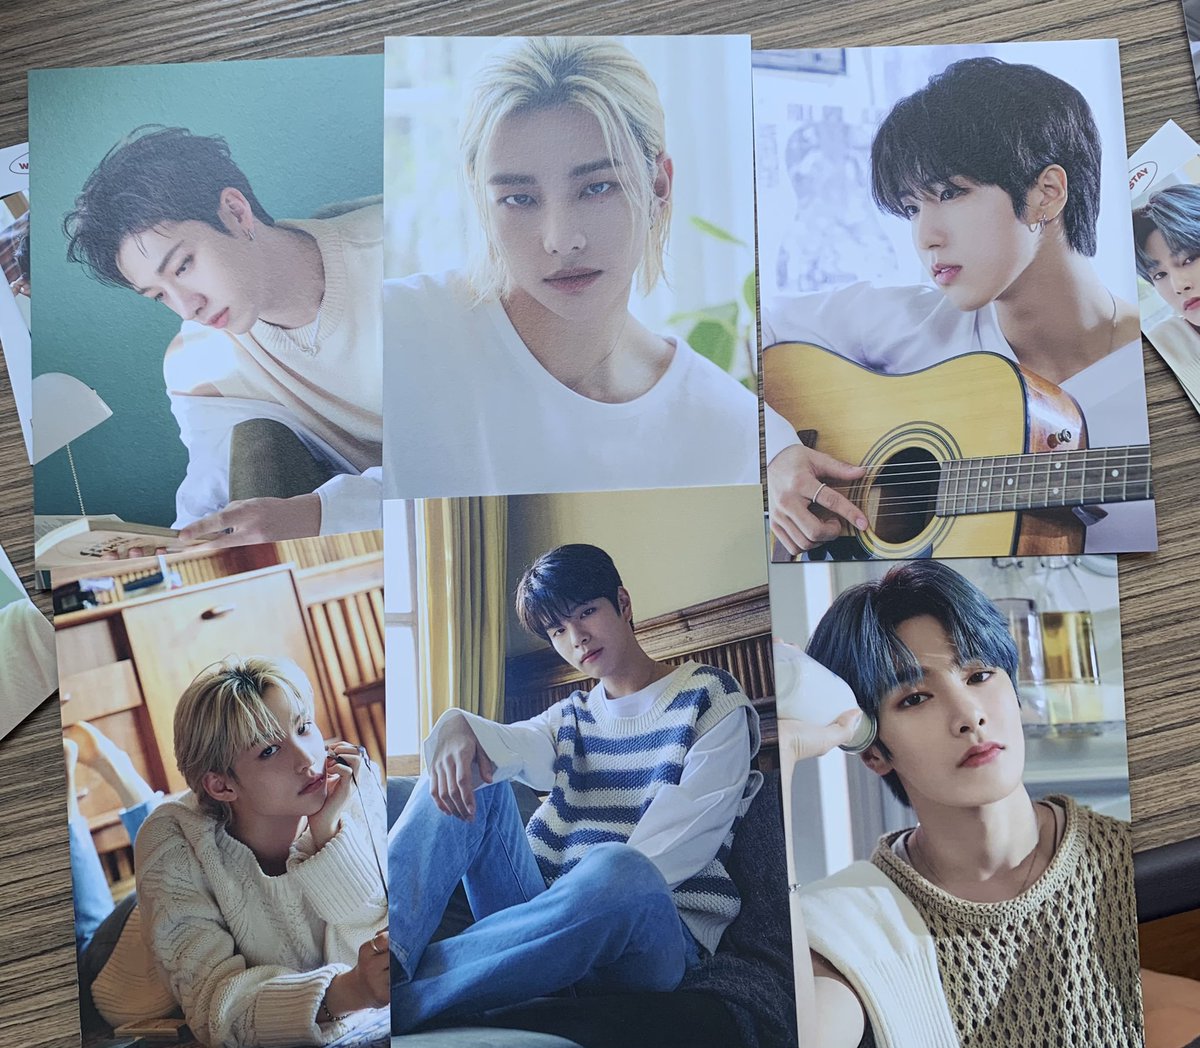 putting up for claims! seasons greeting member set $7 SGD (1 pc + 1 frame pc + 3 postcards per member) unit + group postcards $5 for set of 3 please dm if you are an overseas buyer!~